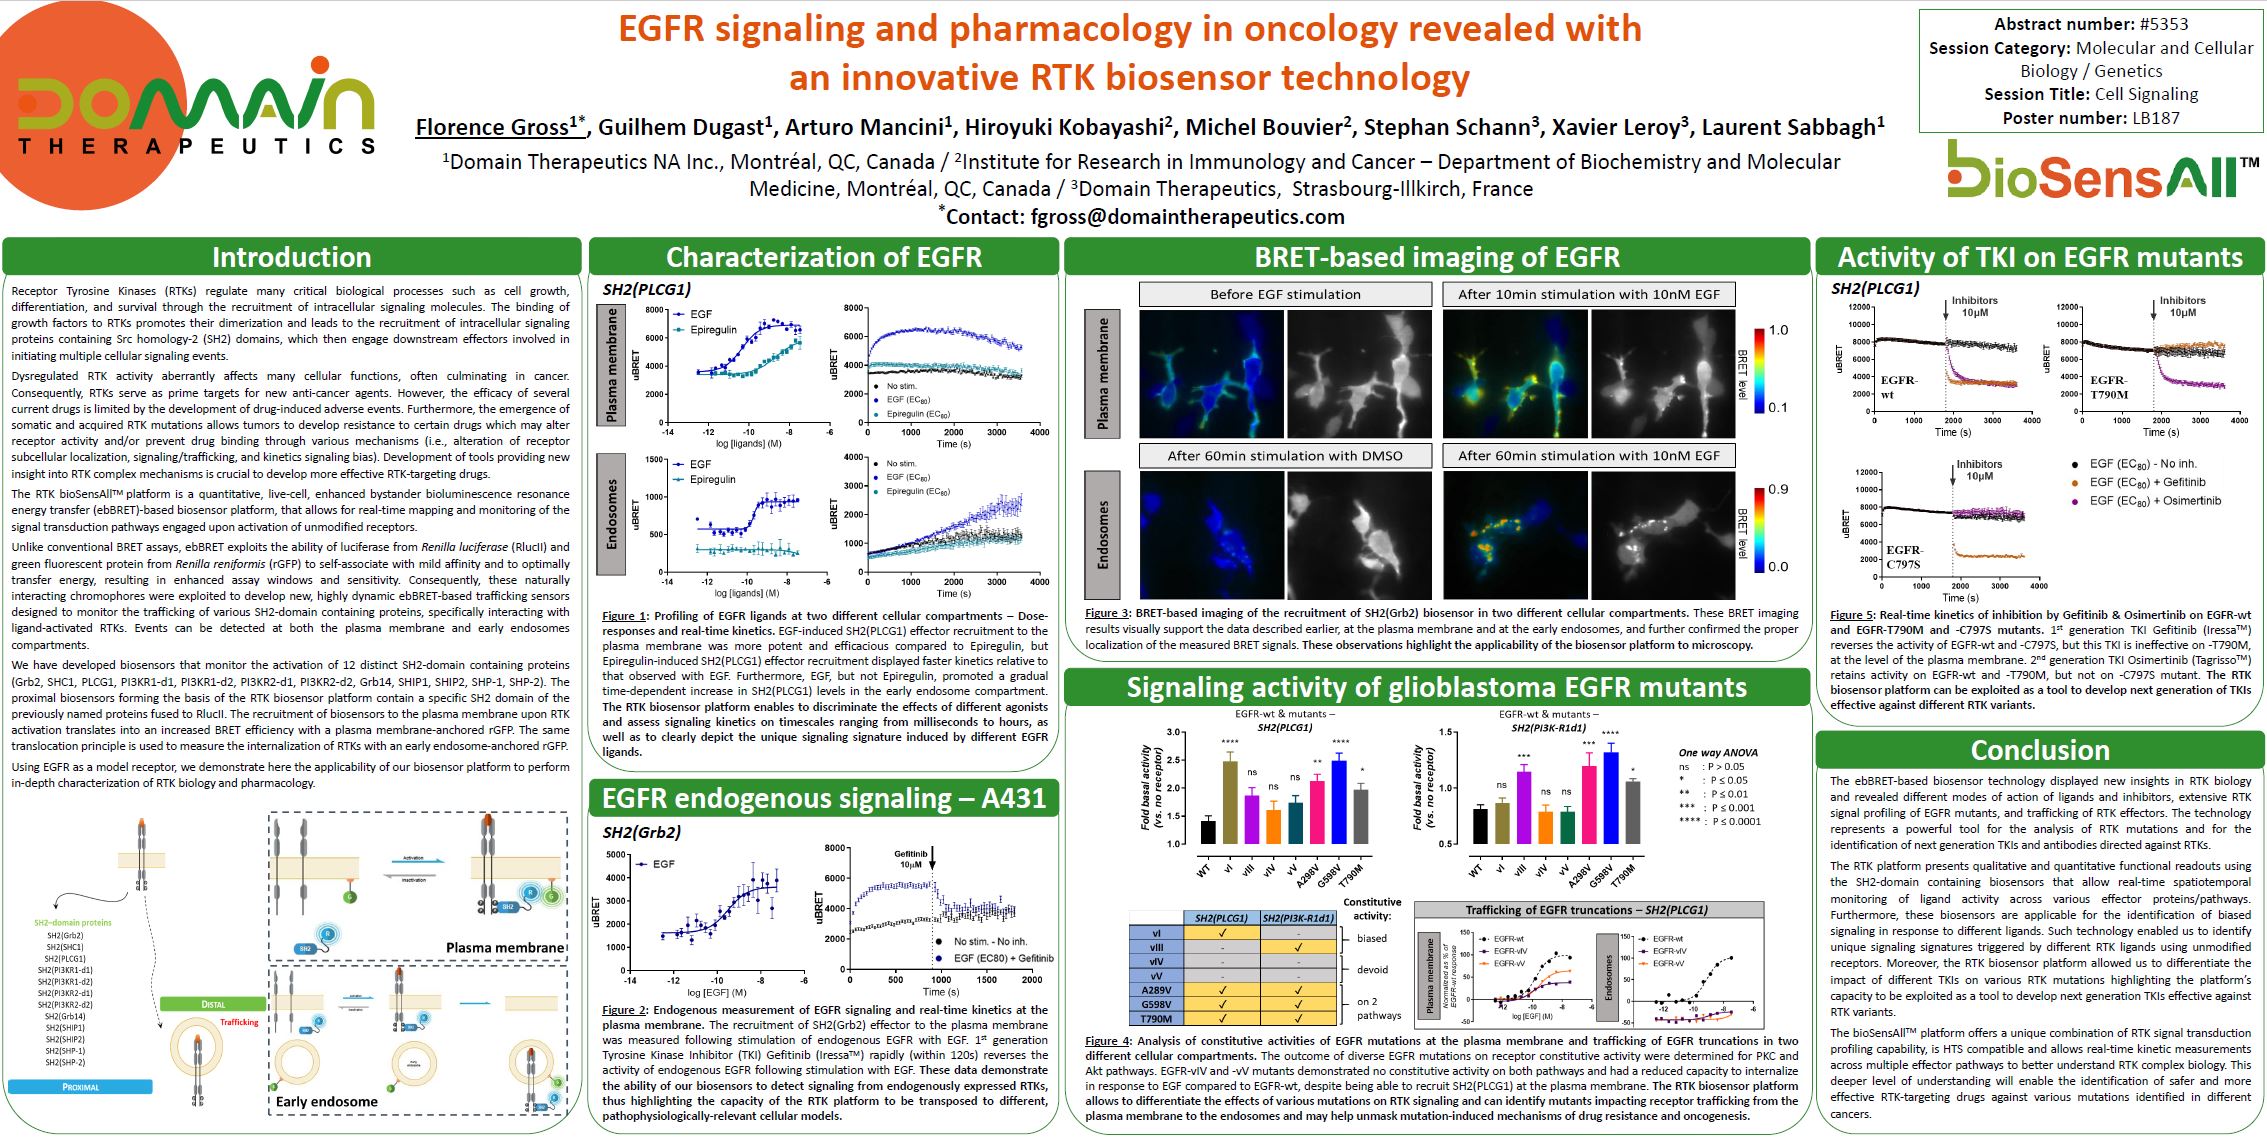 AACR 2021: EGFR Signaling and pharmacology in oncology revealed with an innovative RTK biosensor technology